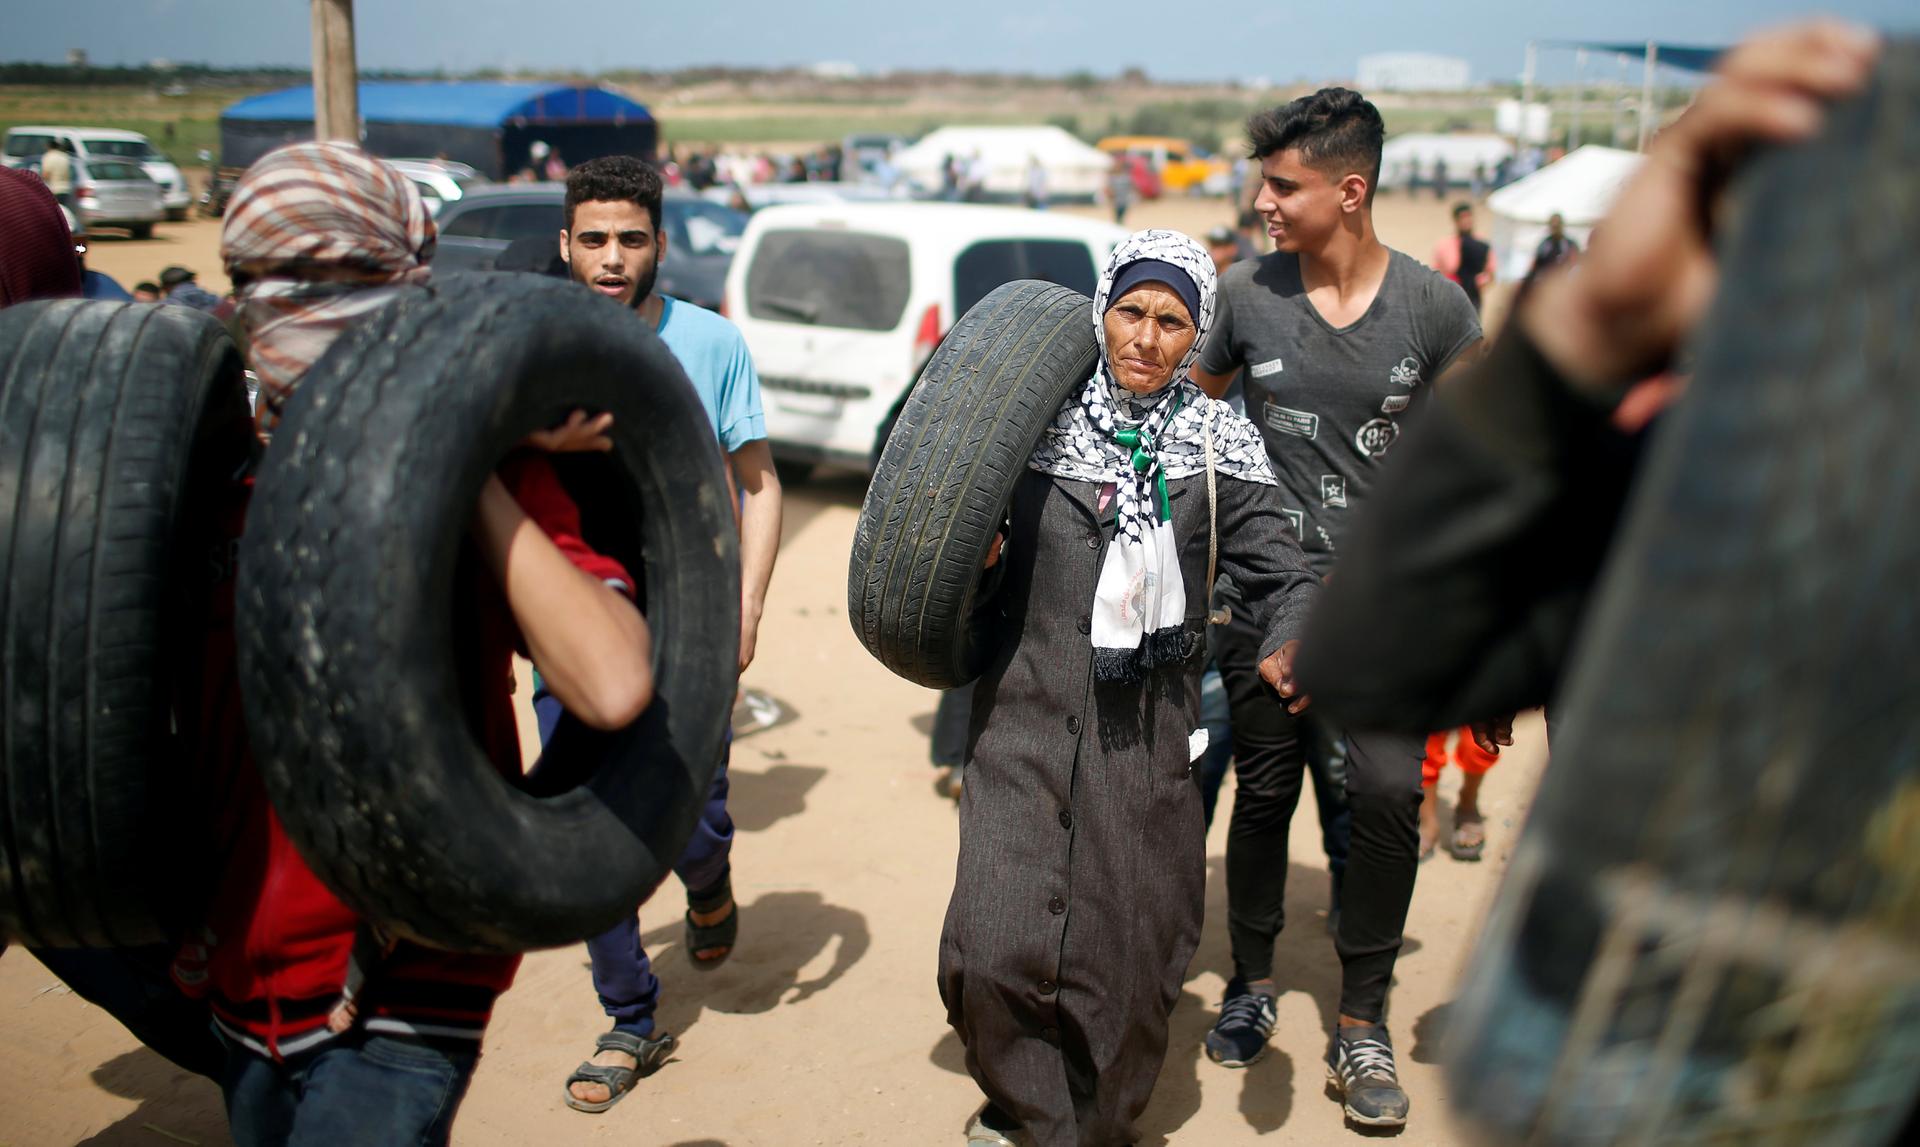 Palestinian demonstrators carry tires during a protest against US embassy move to Jerusalem.